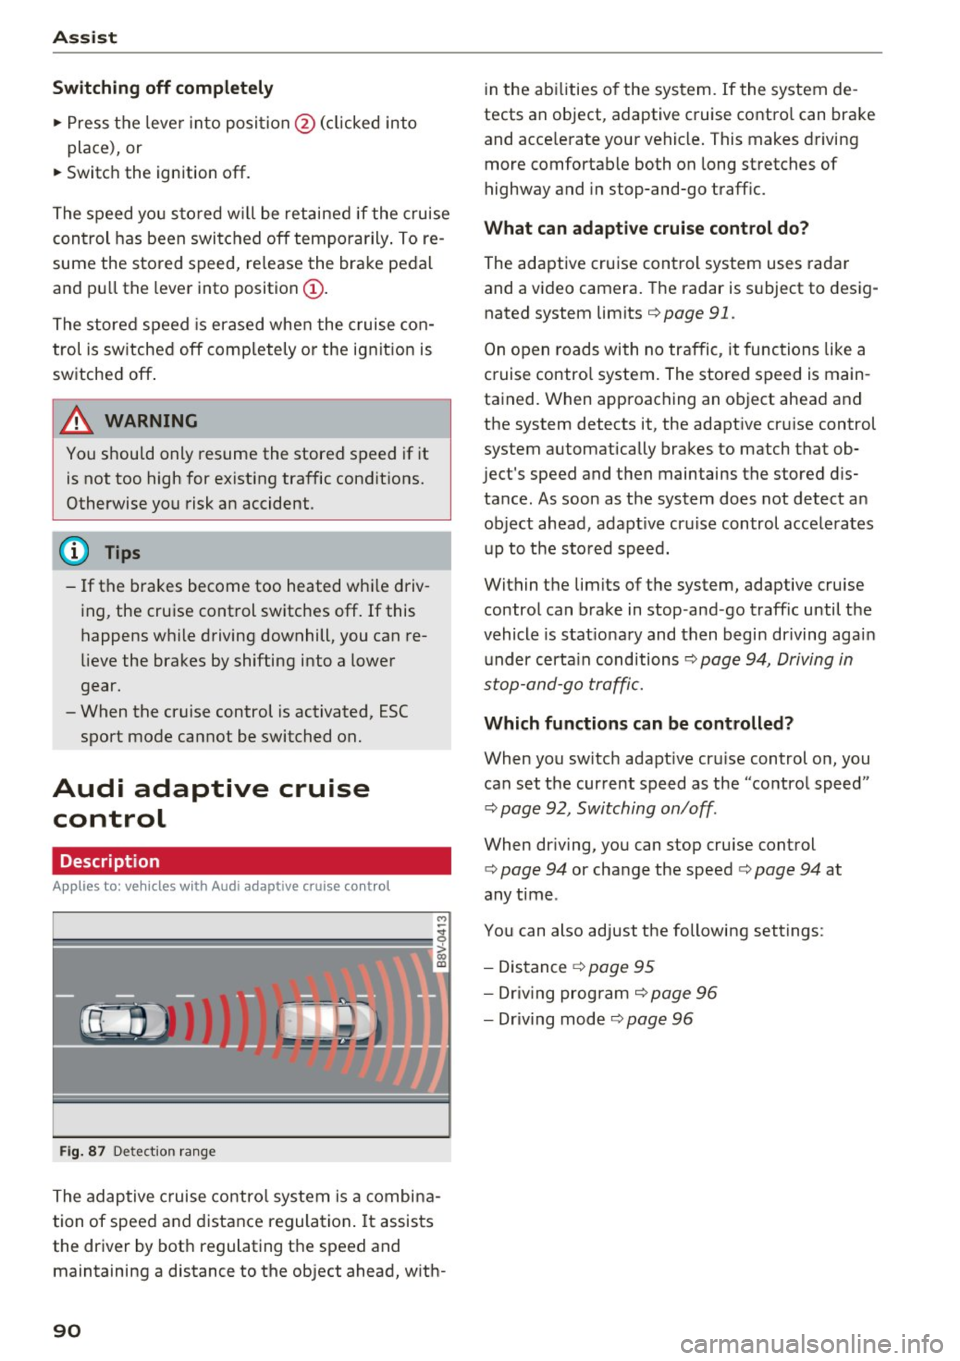 AUDI A3 CABRIOLET 2016  Owners Manual Assist Switching  off  completely 
.,. Press the  leve r into  position @(clicked  into 
place),  or 
.,.  Switch  the  ignition  off. 
The  speed you sto red w ill be  retained  if  the cruise 
contr